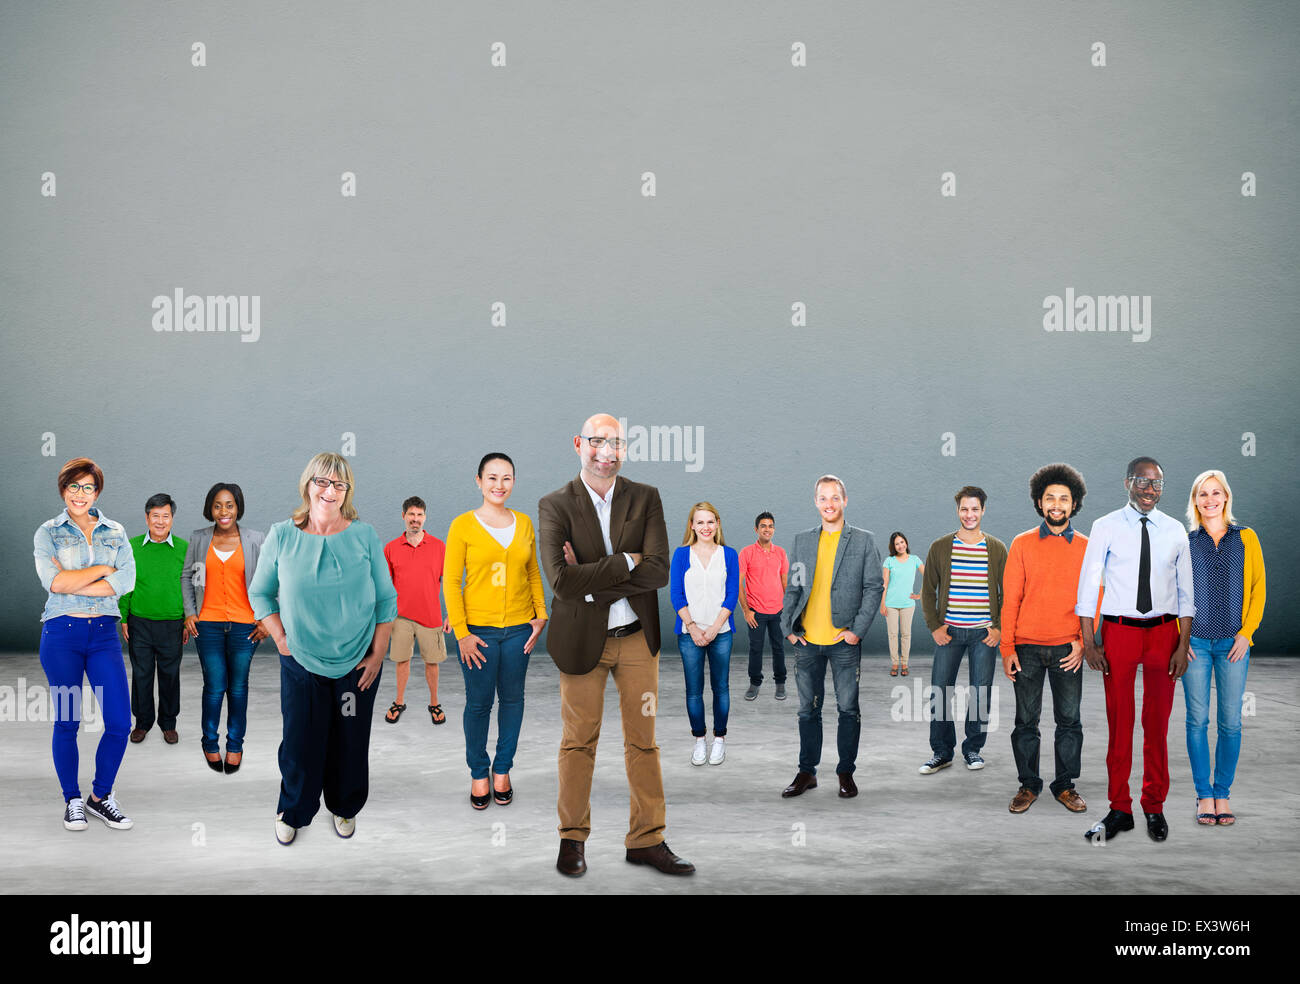 People Community Togetherness Corporate Team Concept Stock Photo